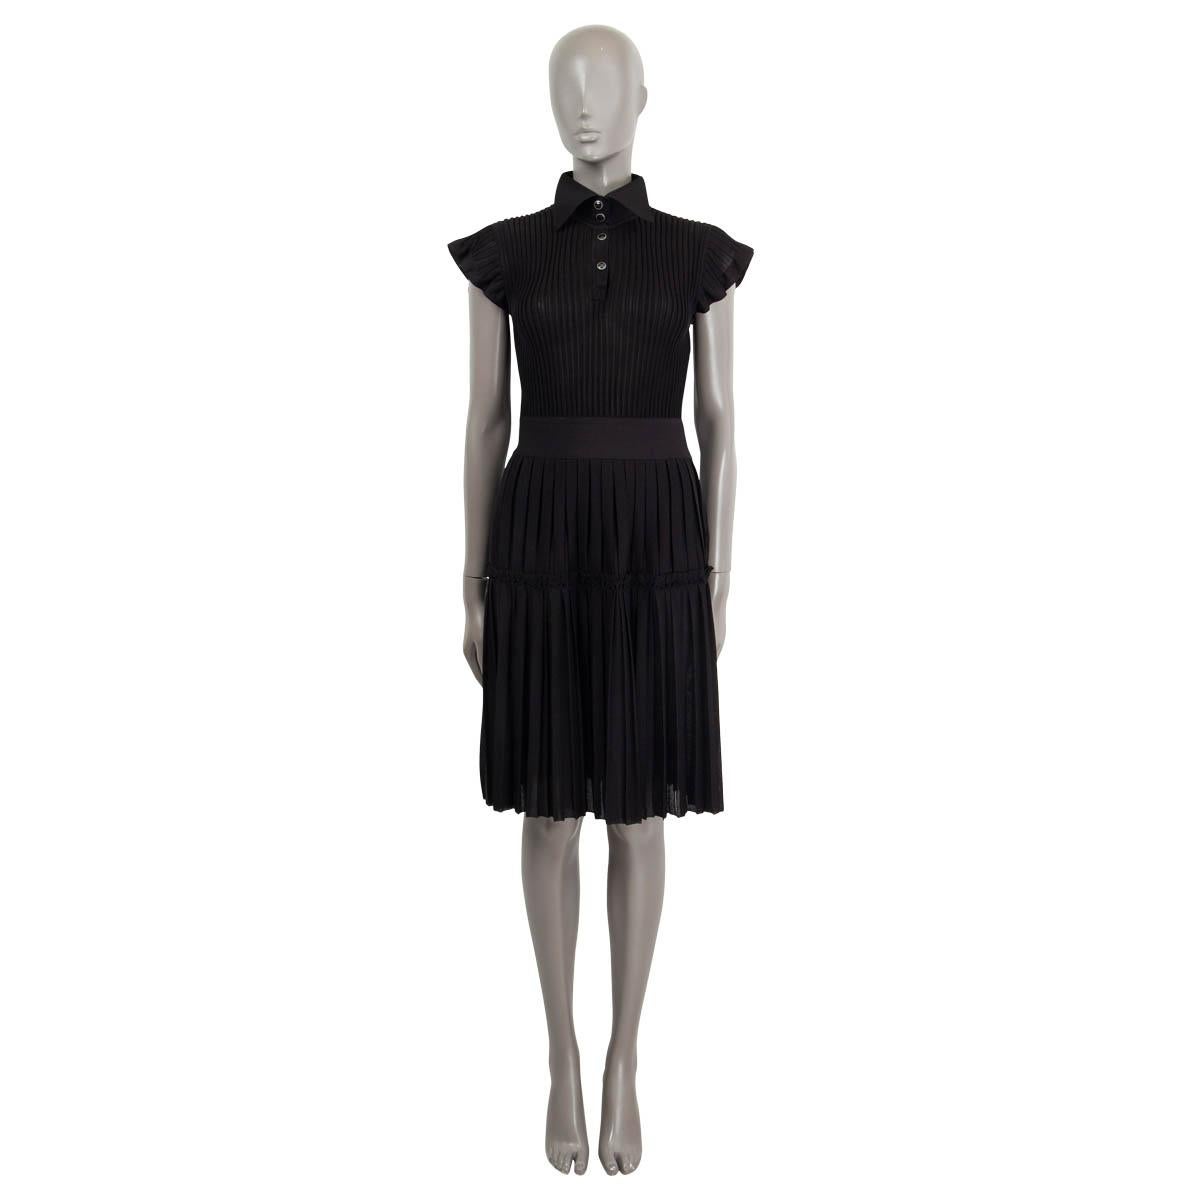 100% authentic Chanel 2018 Pre-Fall rib-knit dress in black viscose (76%) and silk (24% - please note content tag is missing) with a wingtip collar and 4 CC logo silver-tone front buttons. Dress has a ribbed top part and pleated skirt part with a